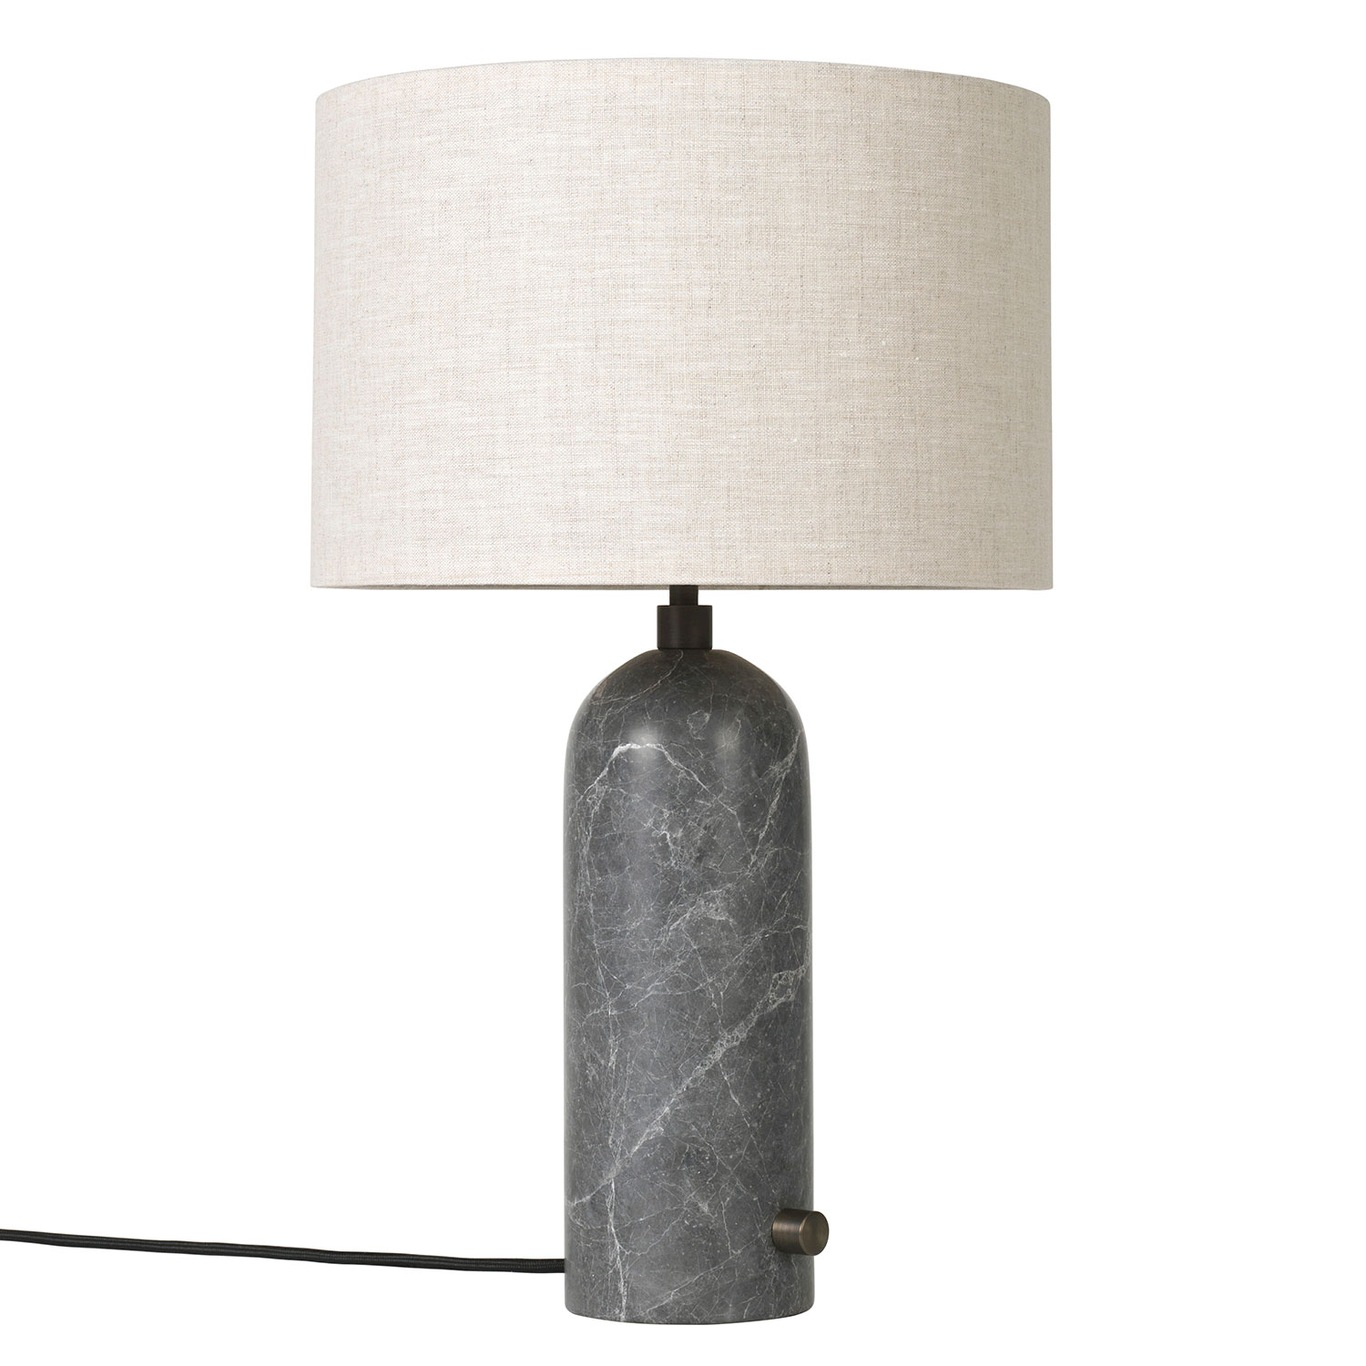 Gravity Table Lamp Small, Grey Marble / Canvas